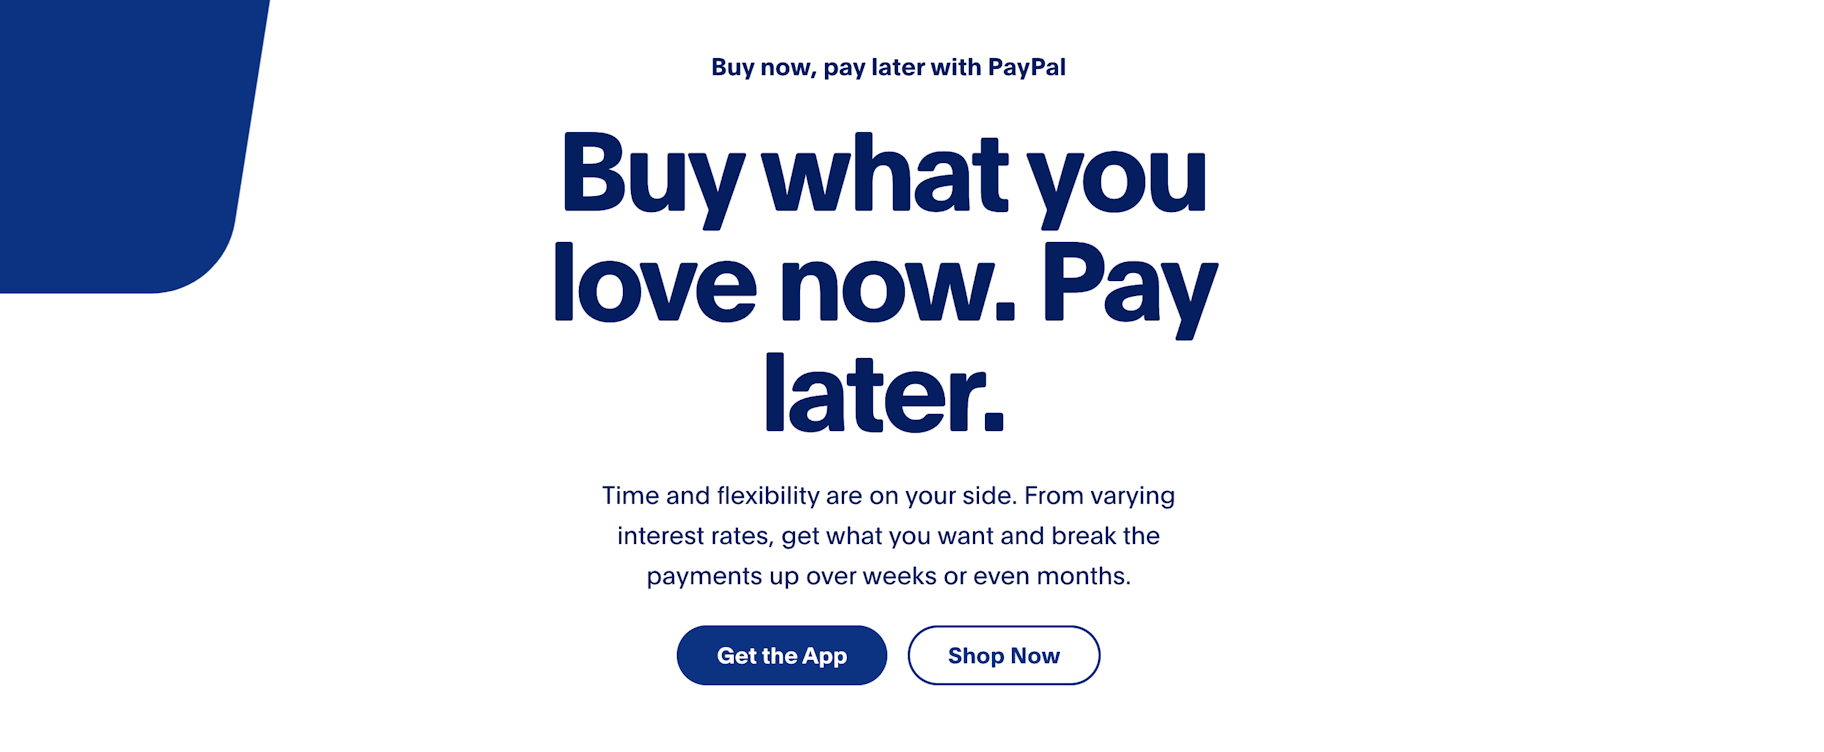 PayPal's buy now pay later service